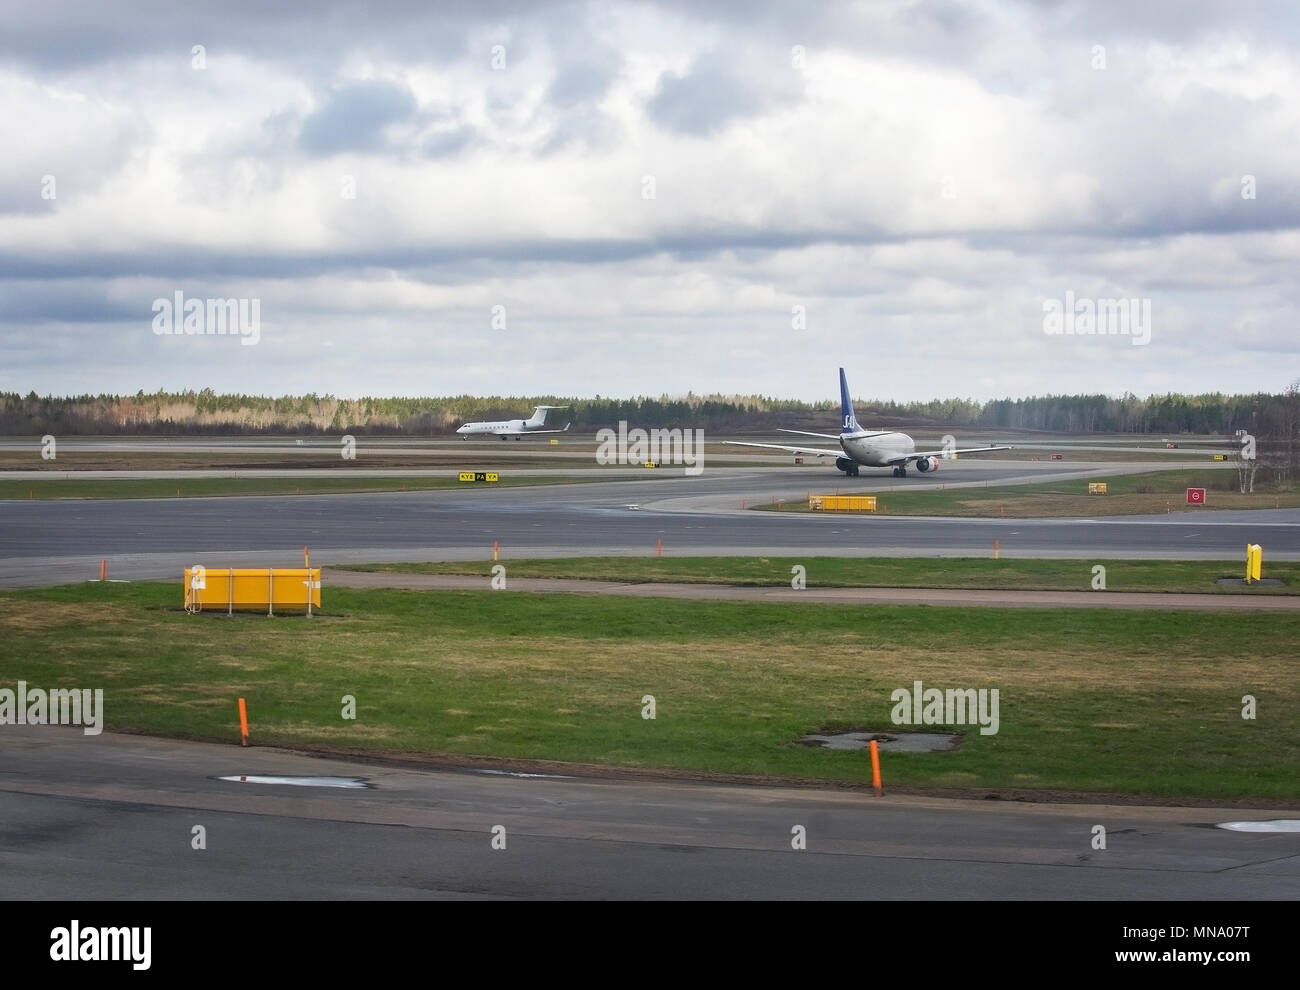 STOCKHOLM, SWEDEN - APRIL 27, 2018: Arlanda airport tarmac and small white government aircraft with three crowns symbol leaves Stock Photo